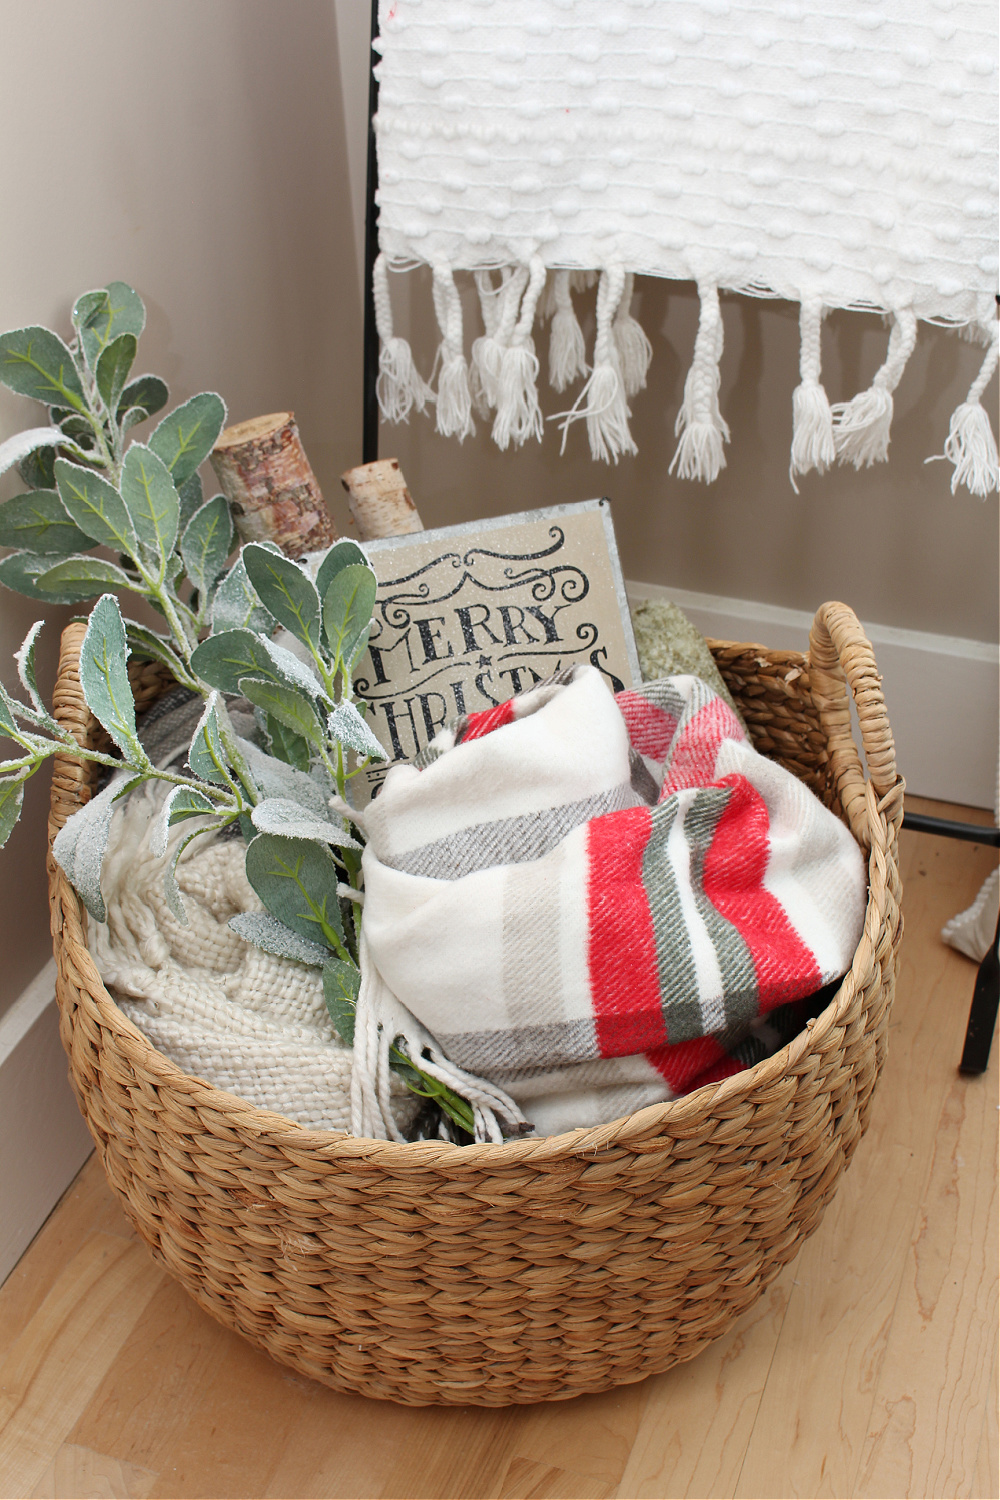 Basket filled with blankets in a festive Christmas living room.